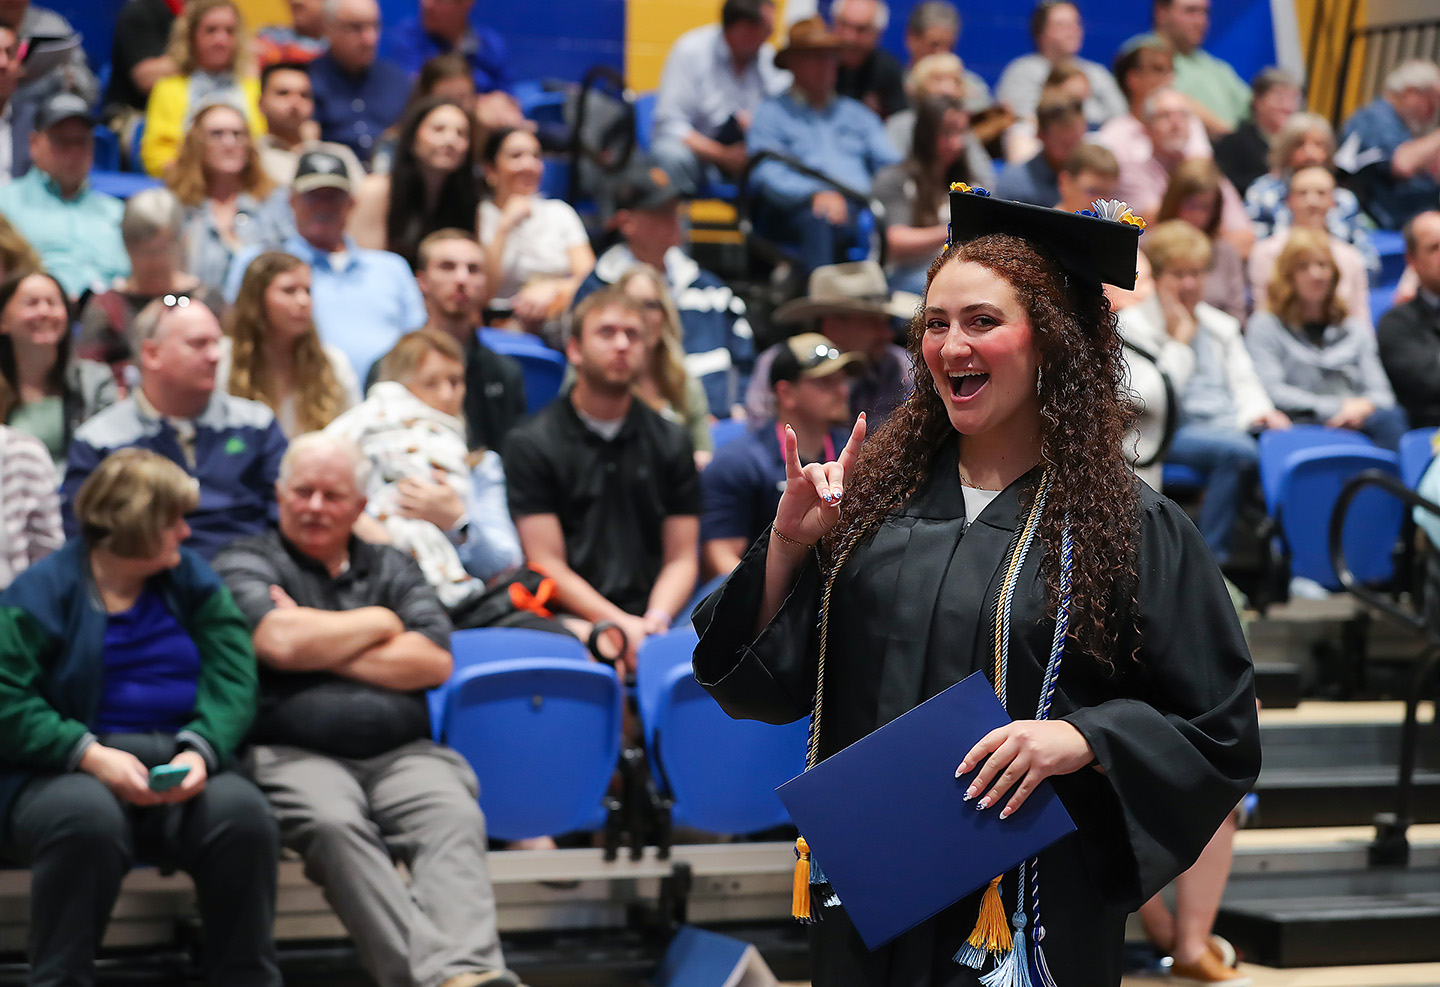 Emily Saadi graduated from UNK on Friday with a bachelor’s degree in political science. She plans to pursue a master’s degree in international relations before attending law school. (Photos by Erika Pritchard, UNK Communications)